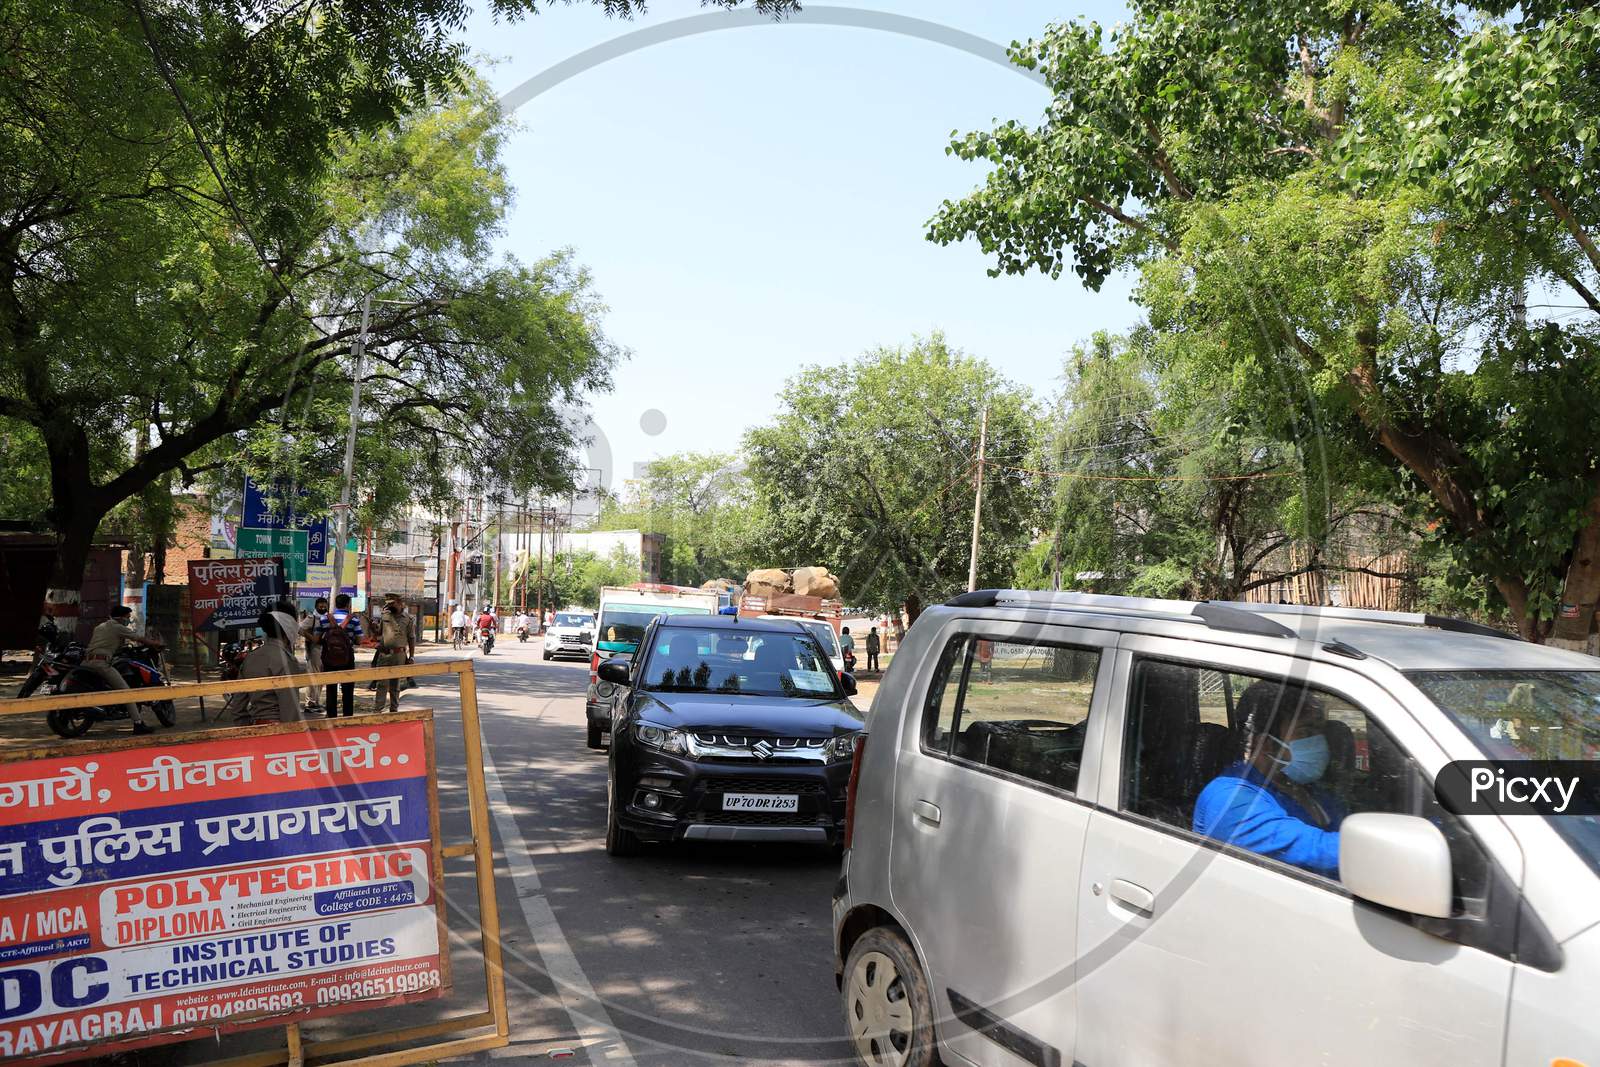 People Drive Through Barricades At City Entrance Points As They Enter The Prayagraj City During Nationwide Lockdown Amidst Coronavirus Or Covid-19 Pandemic  In Prayagraj, May 12, 2020